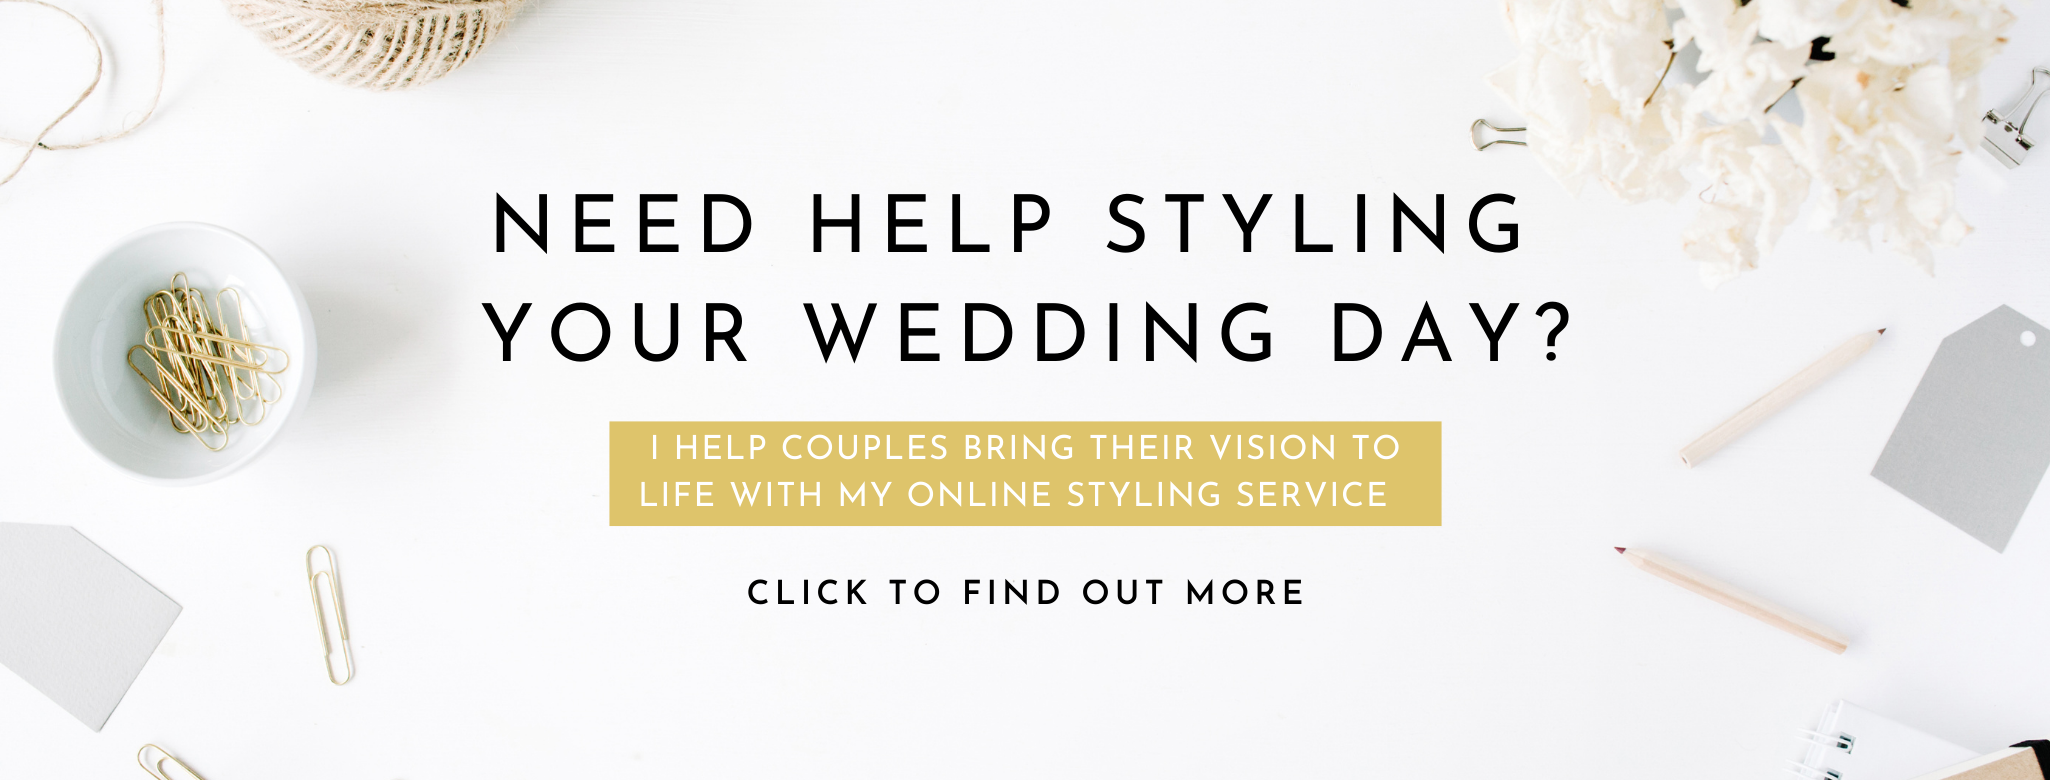 wedding styling services